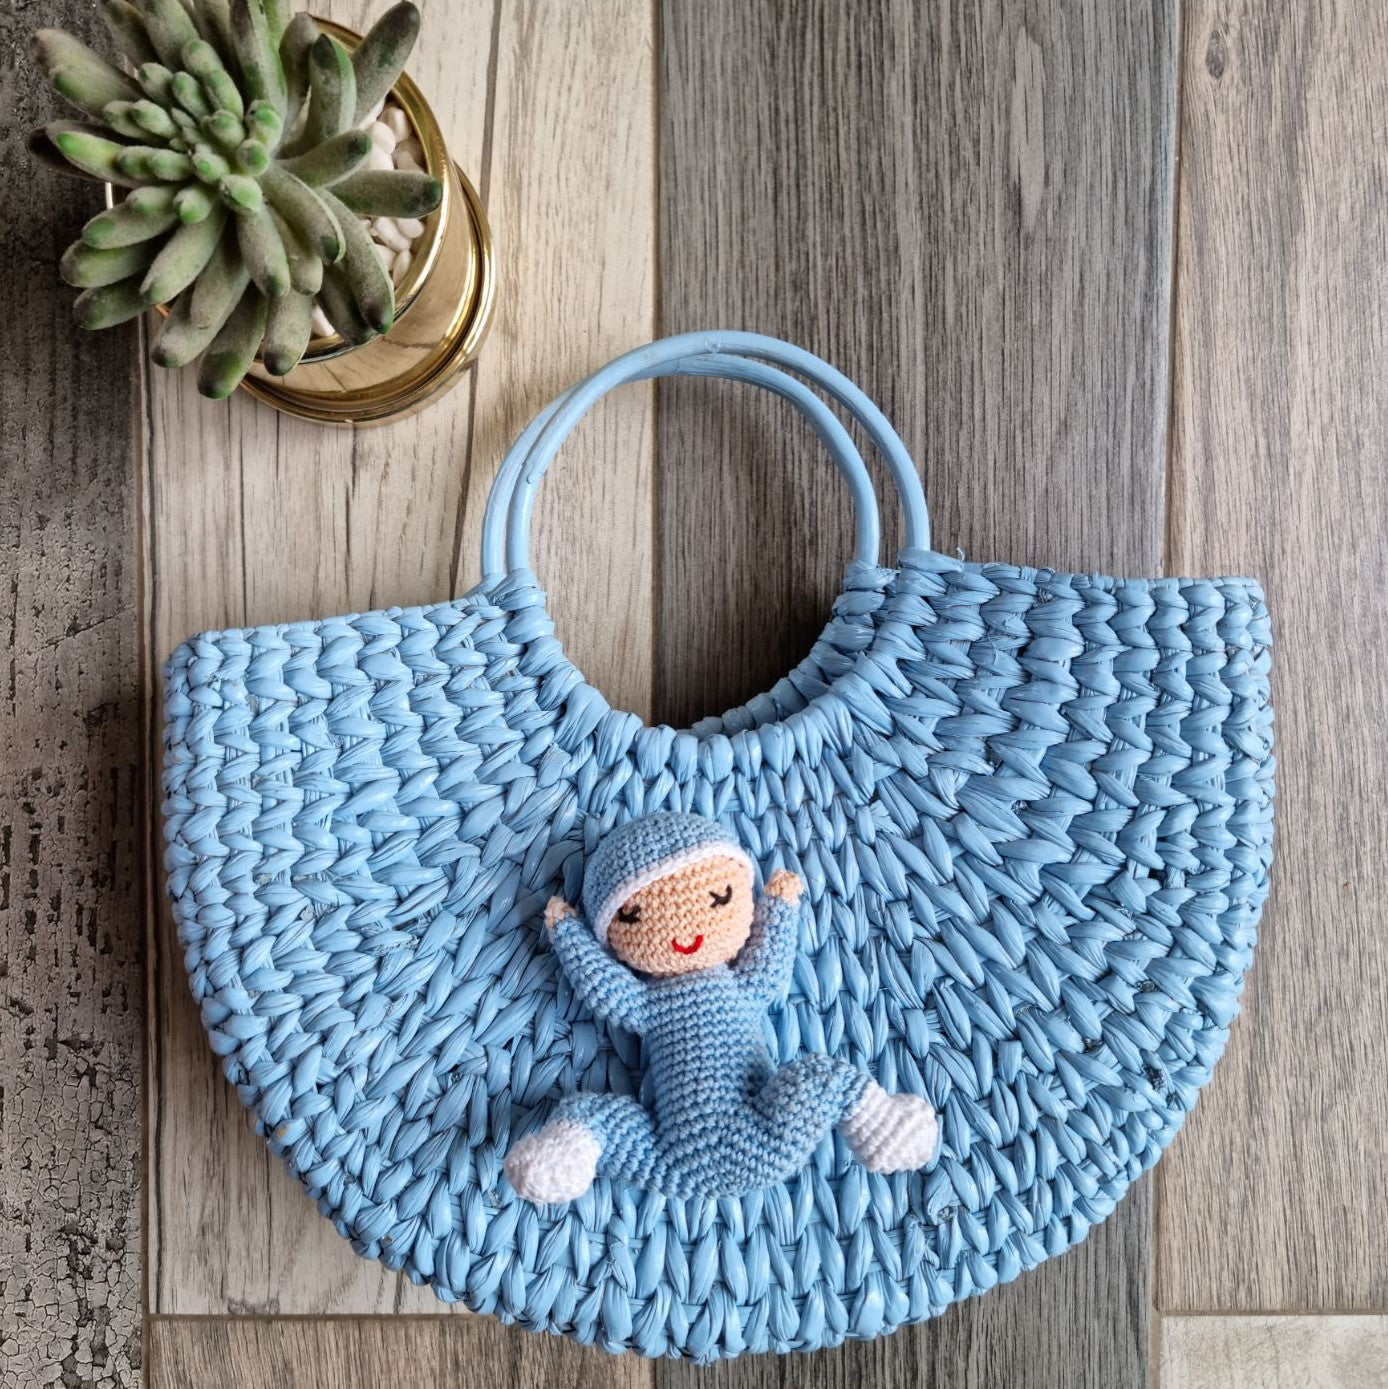 The Cerulean Baby Bag